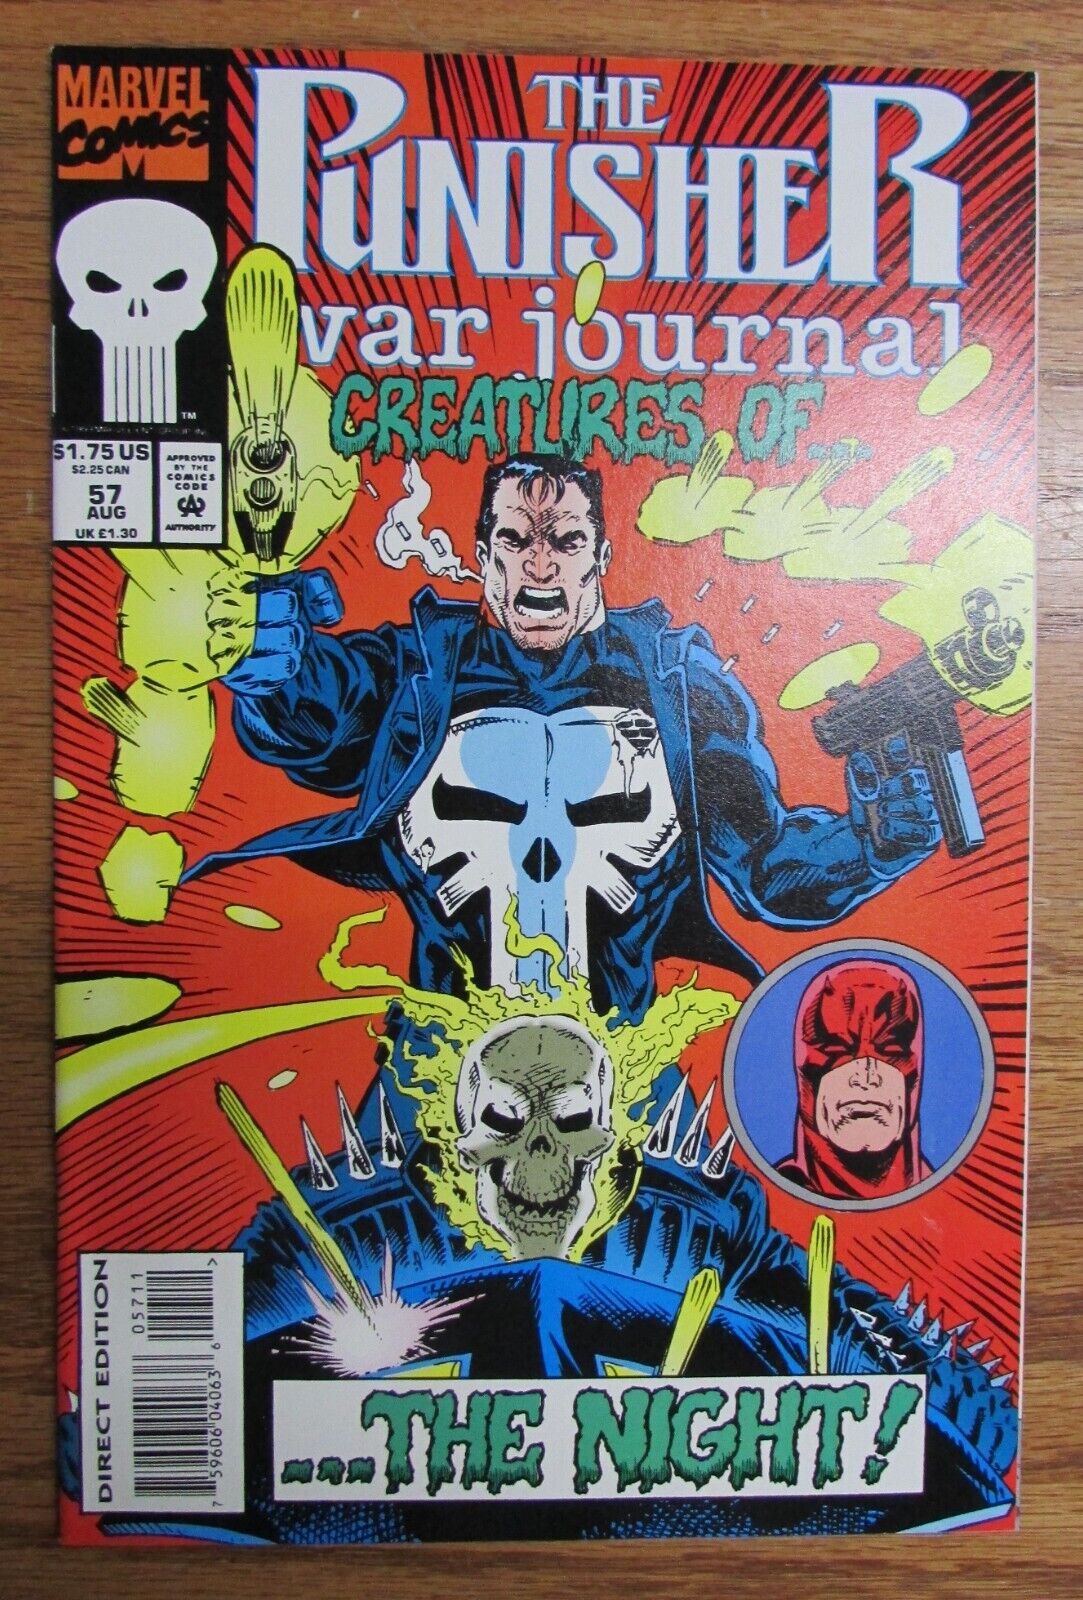 MARVEL COMIC BOOK THE PUNISHER WR JOURNAL CREATURES OF THE NIGHT #57 AUG 1993